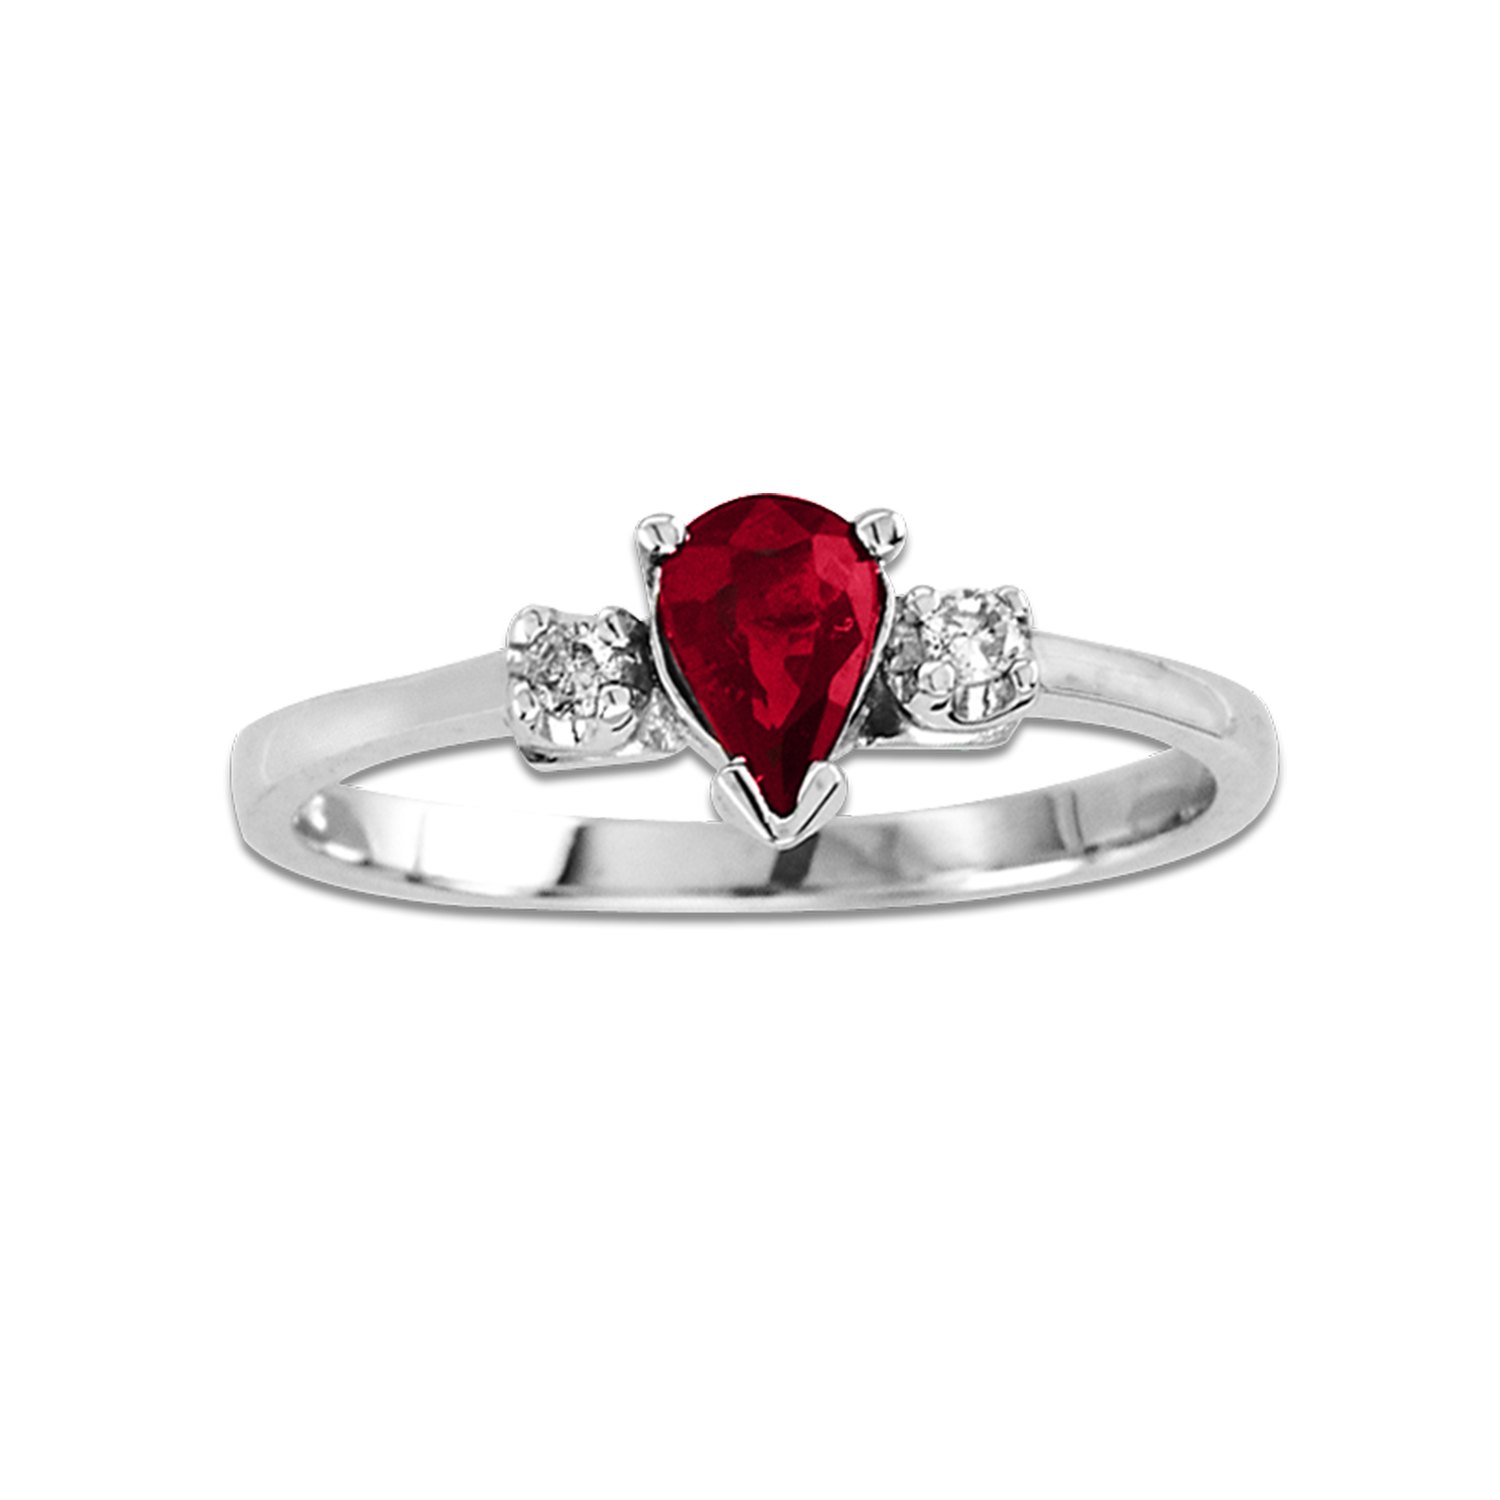 0.49cttw Diamond and Pear Shaped Natural Heated Ruby Ring set in 14k Gold